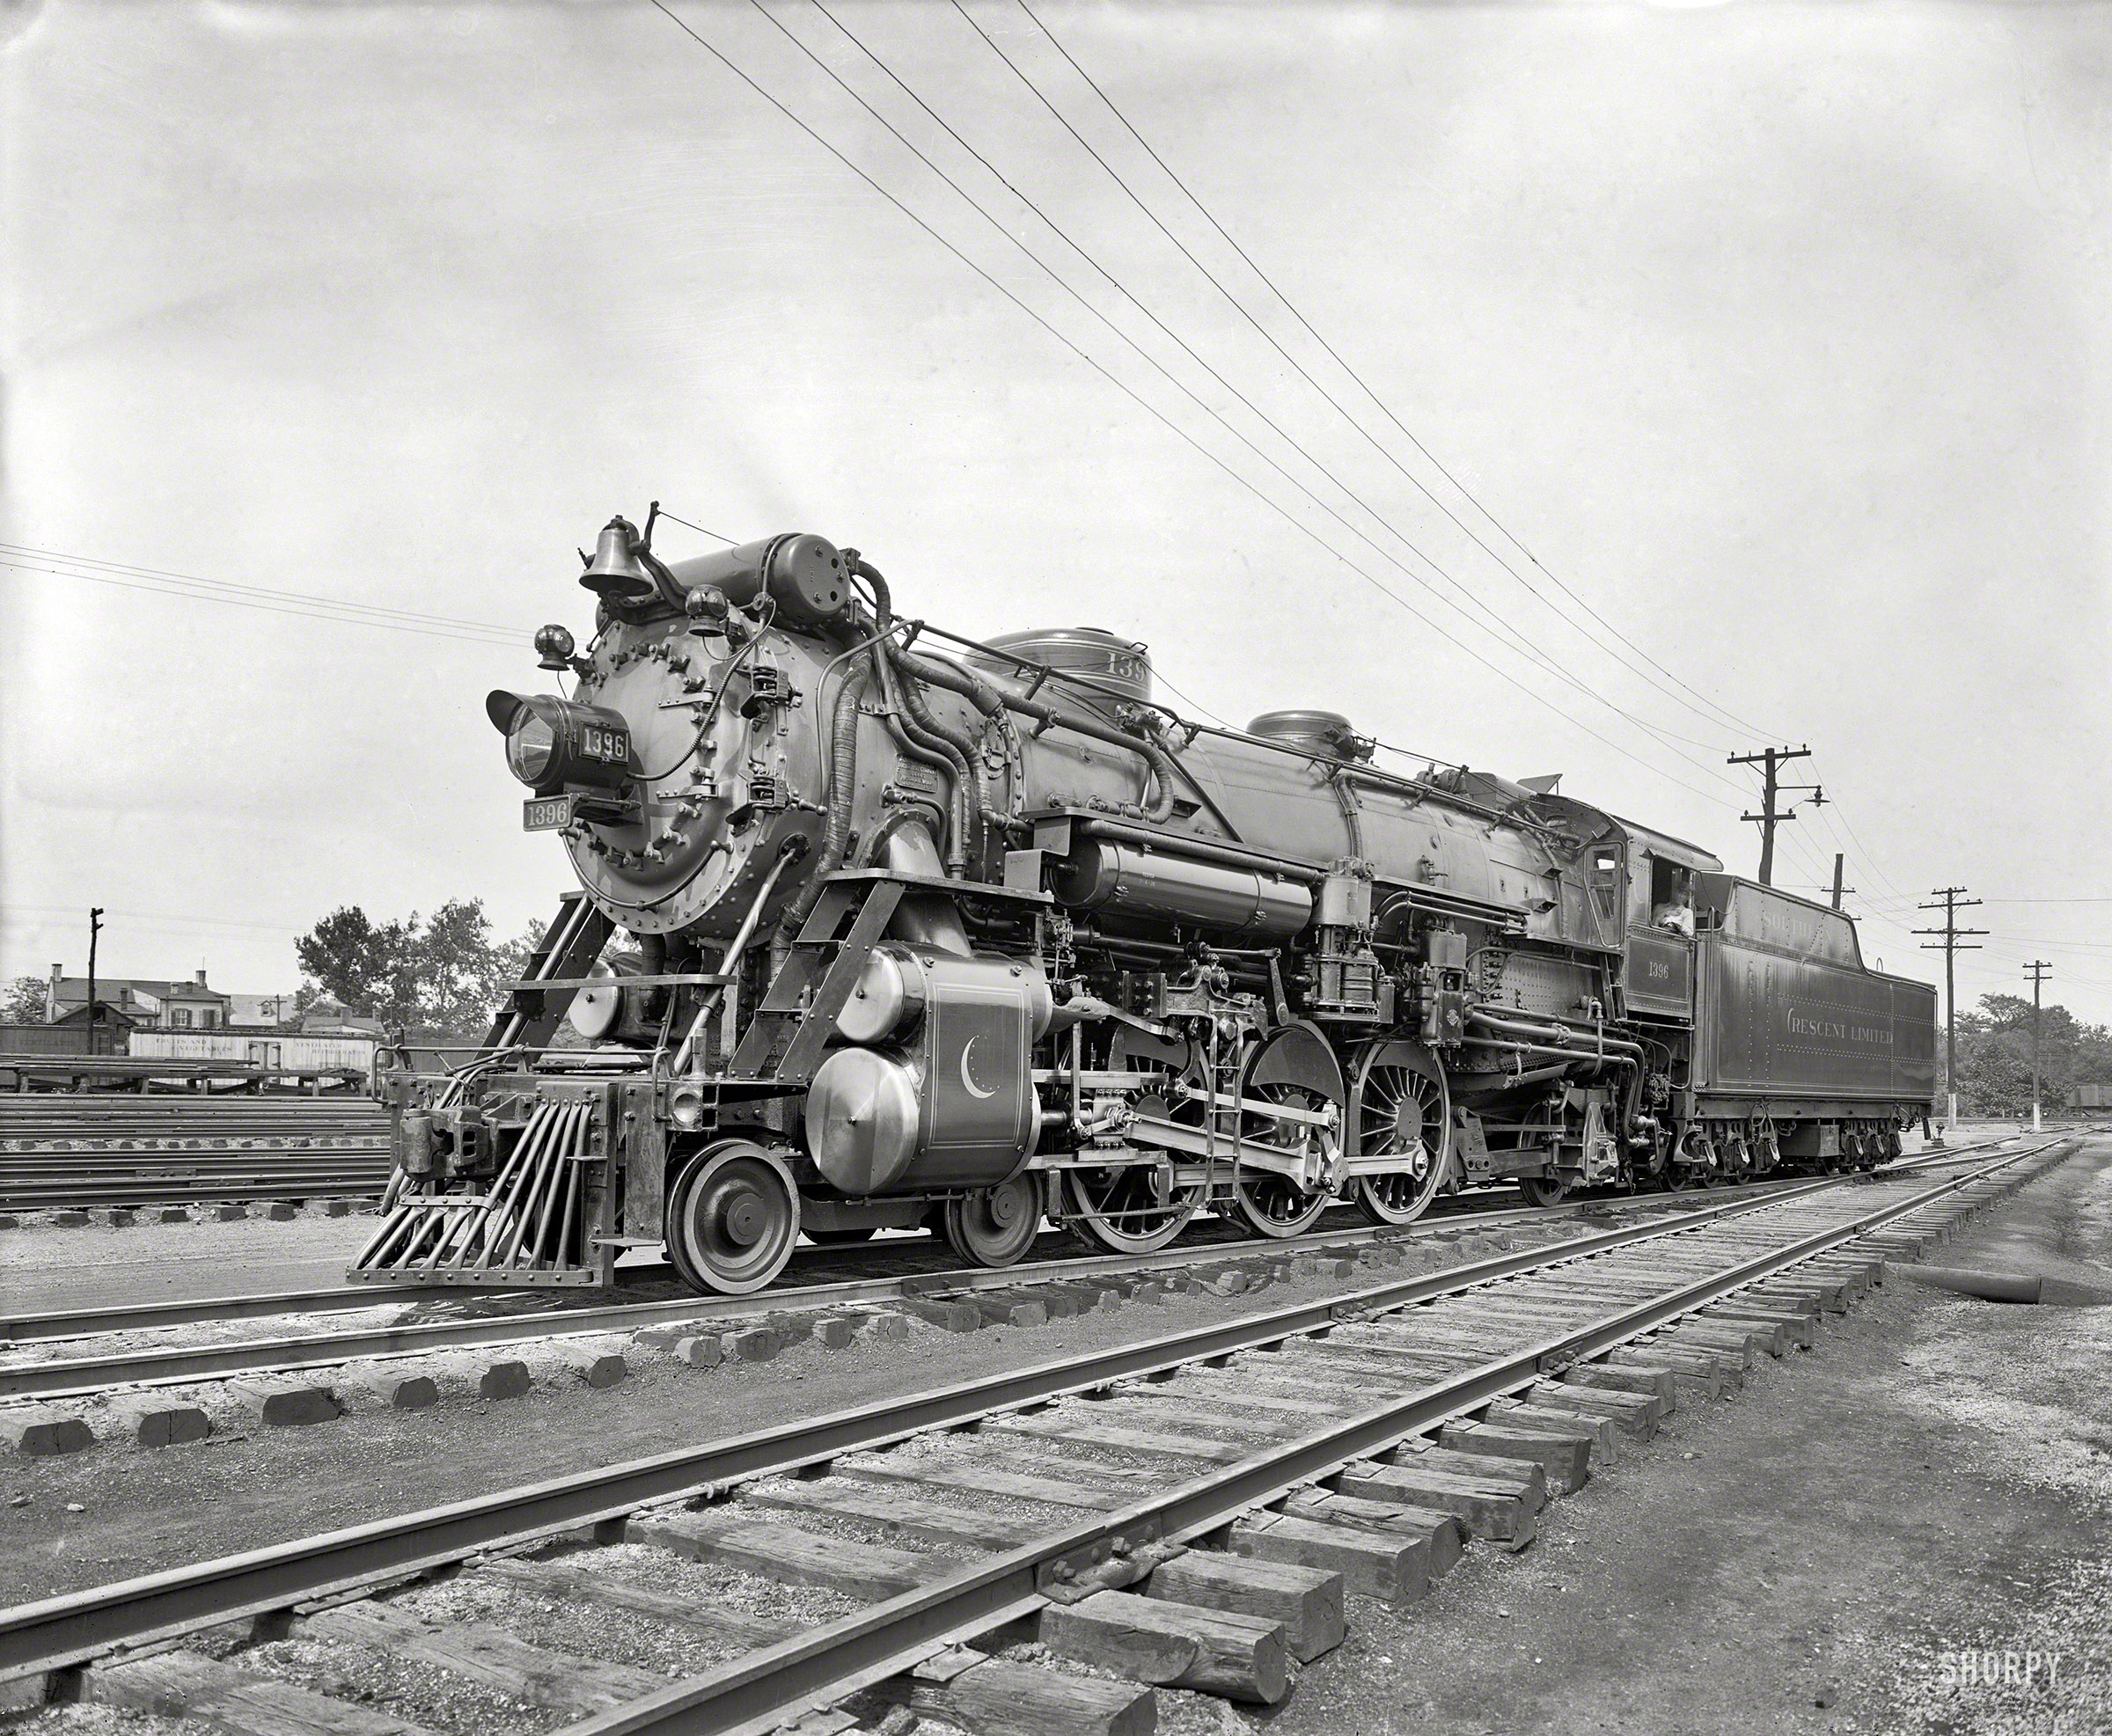 Alexandria, Virginia, circa 1926. "American Locomotive Co. -- Southern R.R. Crescent Limited 1396." Seen here from the other side, with more info in the comments. National Photo Company Collection glass negative. View full size.